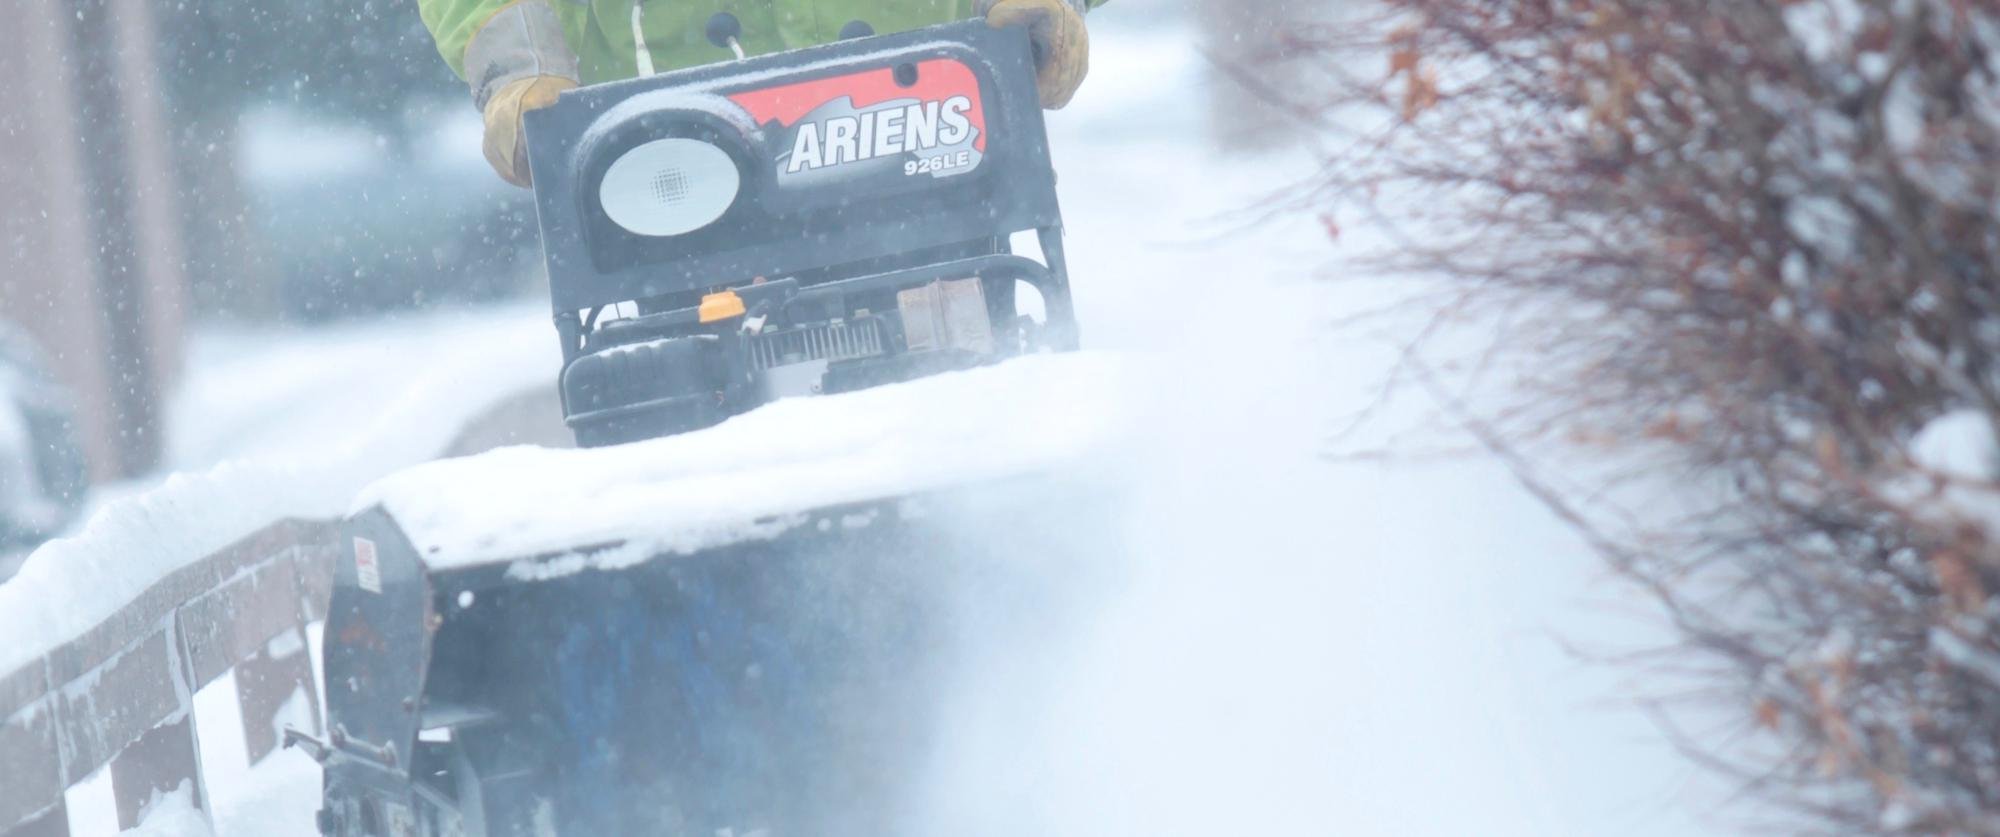 Clearing residential sidewalks with a snow blower